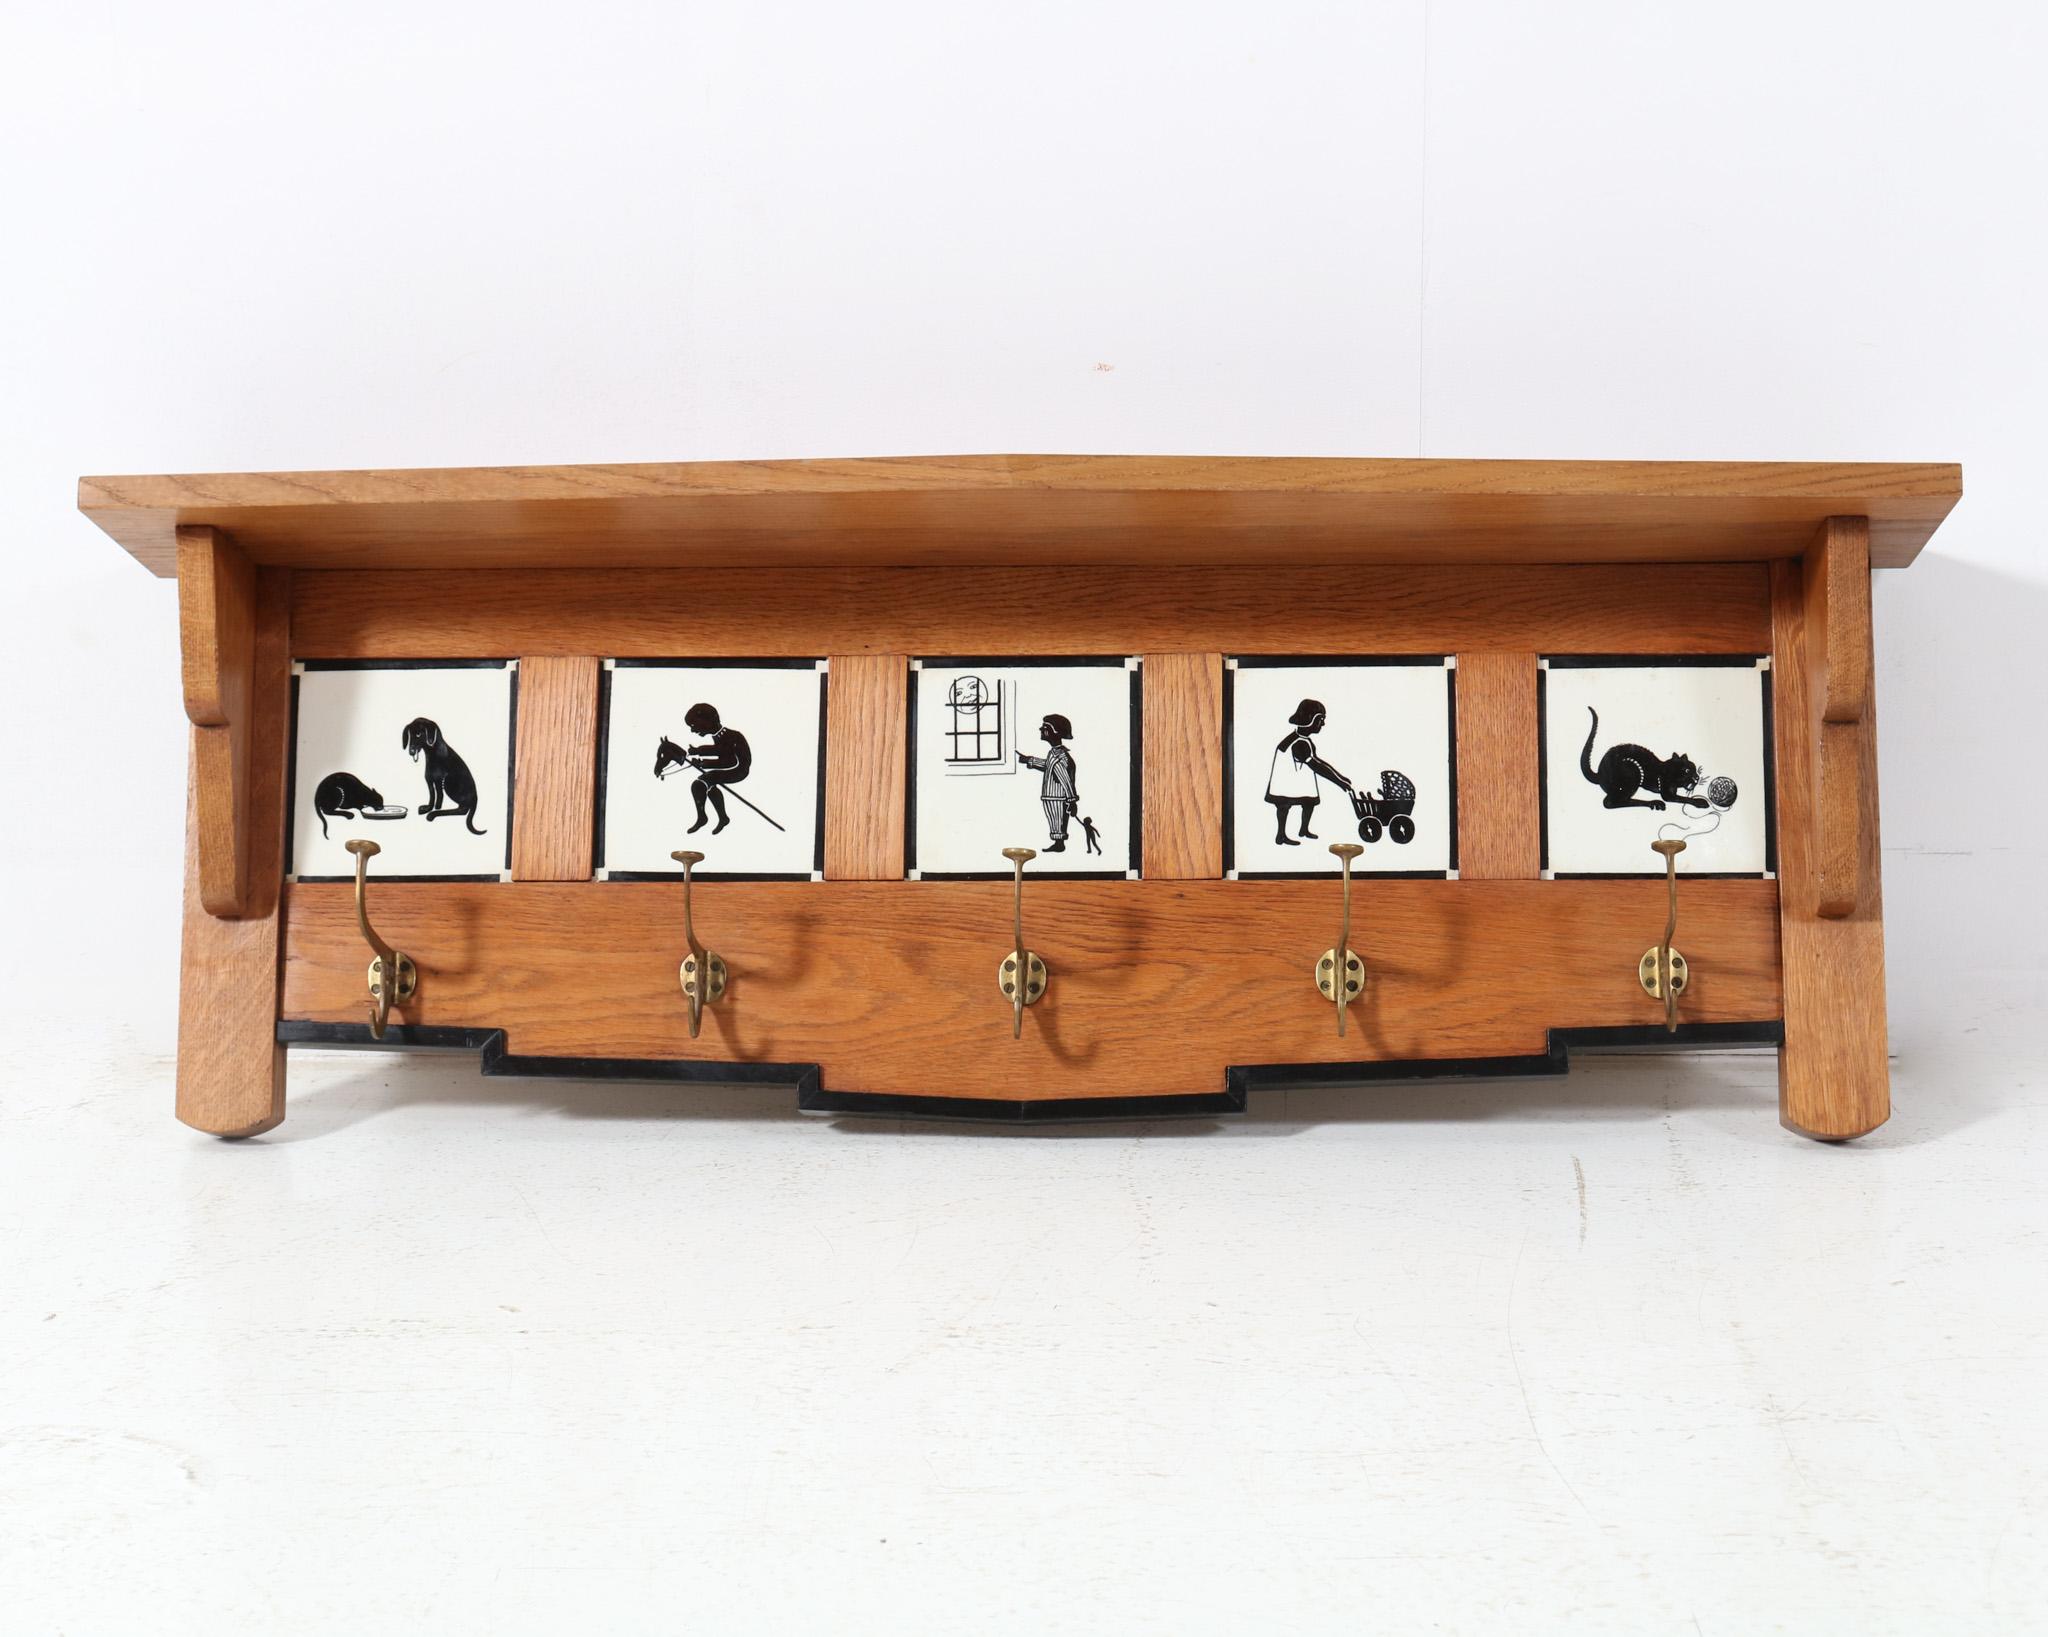 Stunning and ultra rare Art Deco Amsterdamse School coat rack.
Striking Dutch design from the 1920s.
Solid oak and black lacquered frame with five original ceramic tiles.
All tiles have decorative images such as a cat playing with a ball of wool and